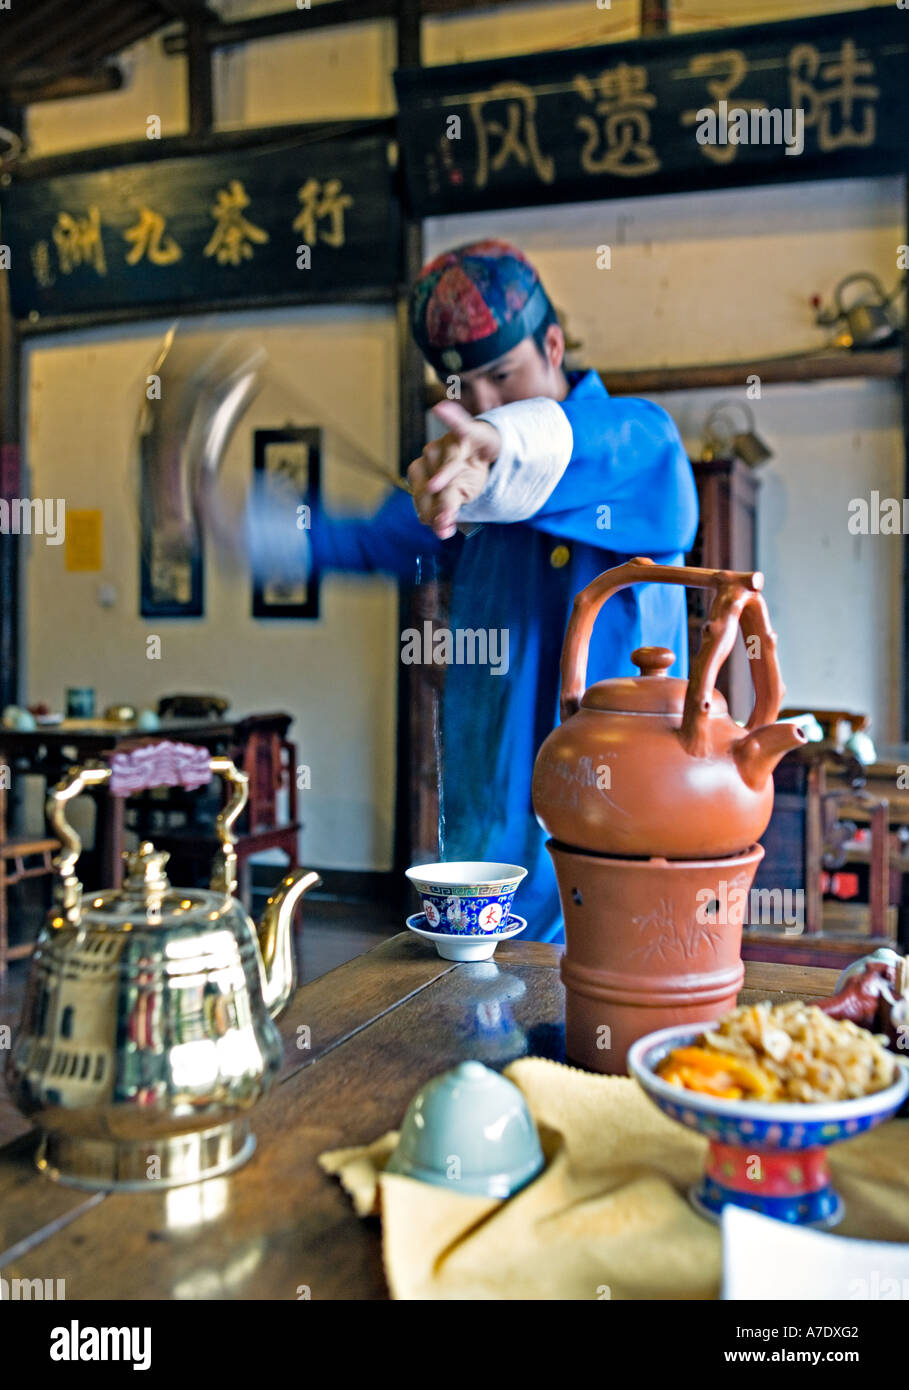 https://c8.alamy.com/comp/A7DXG2/china-hangzhou-young-tea-server-pours-tea-from-behind-his-back-using-A7DXG2.jpg